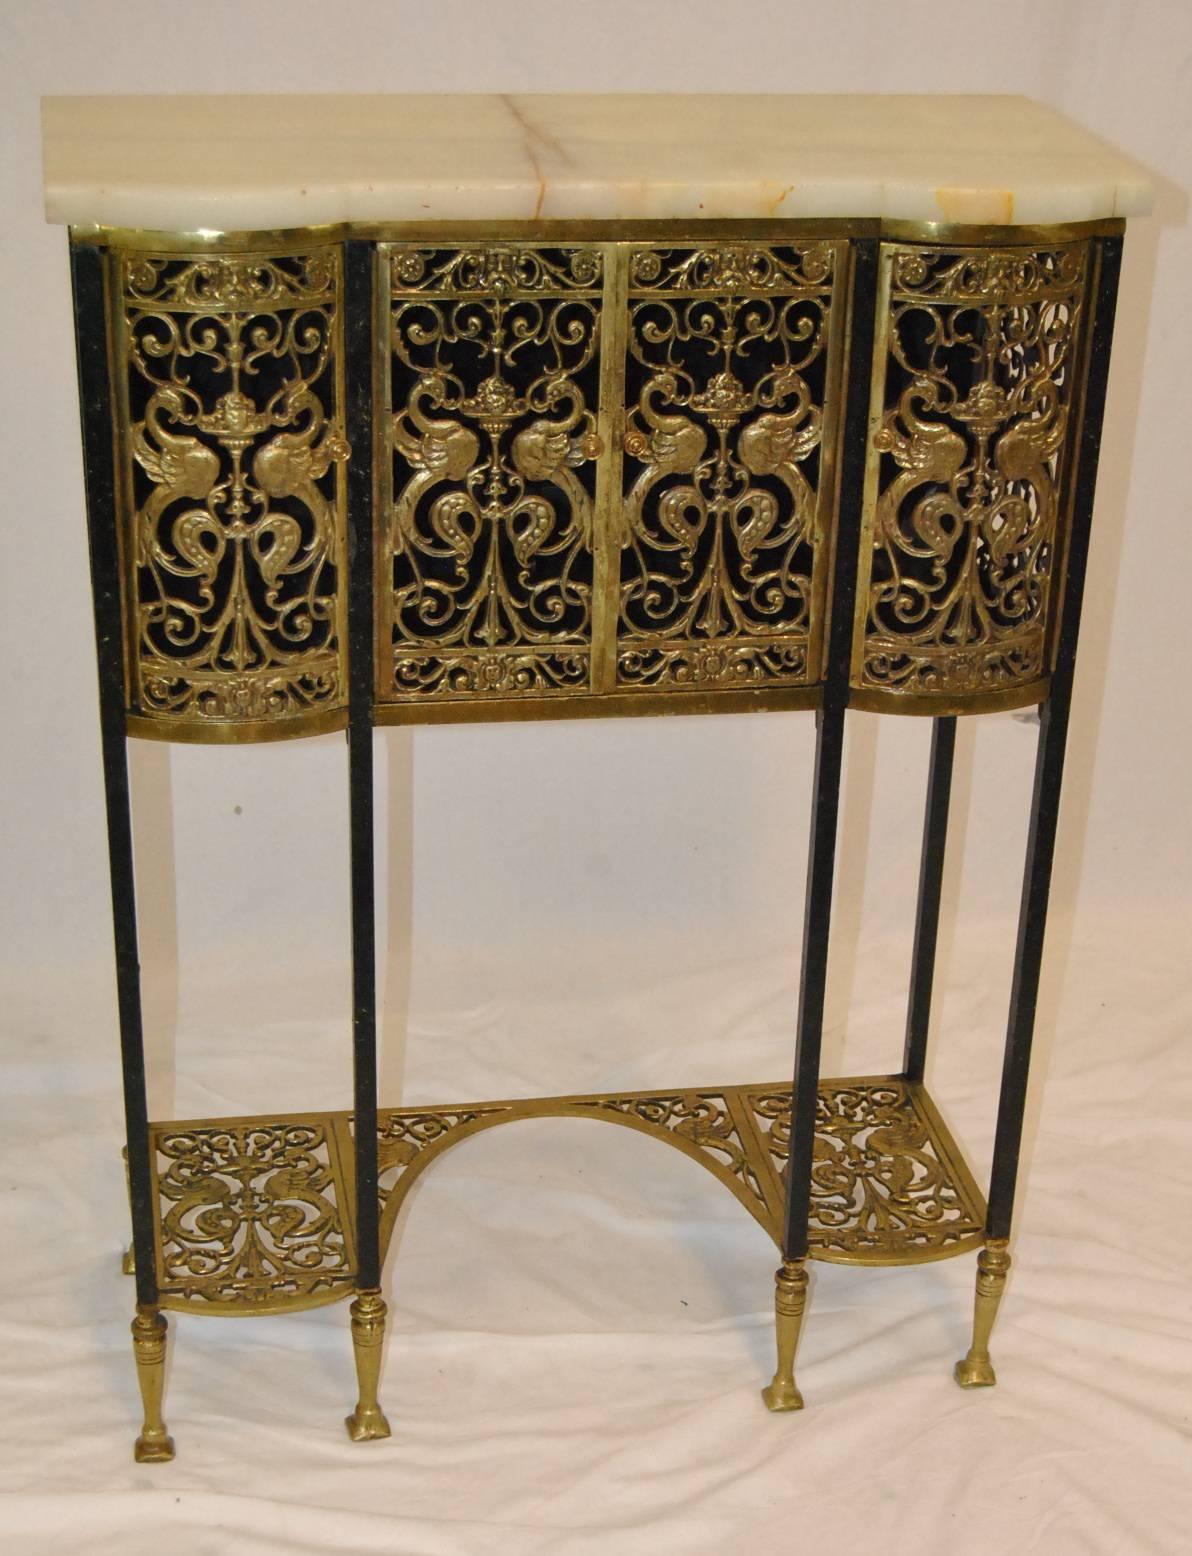 A unique bronze and iron telephone stand in the style of Oscar Bach. Stand has an onyx top with a heavy vein down the center. The back has a slot with slip in a door to allow for the telephone cord. The four doors on the front have ornate pierced